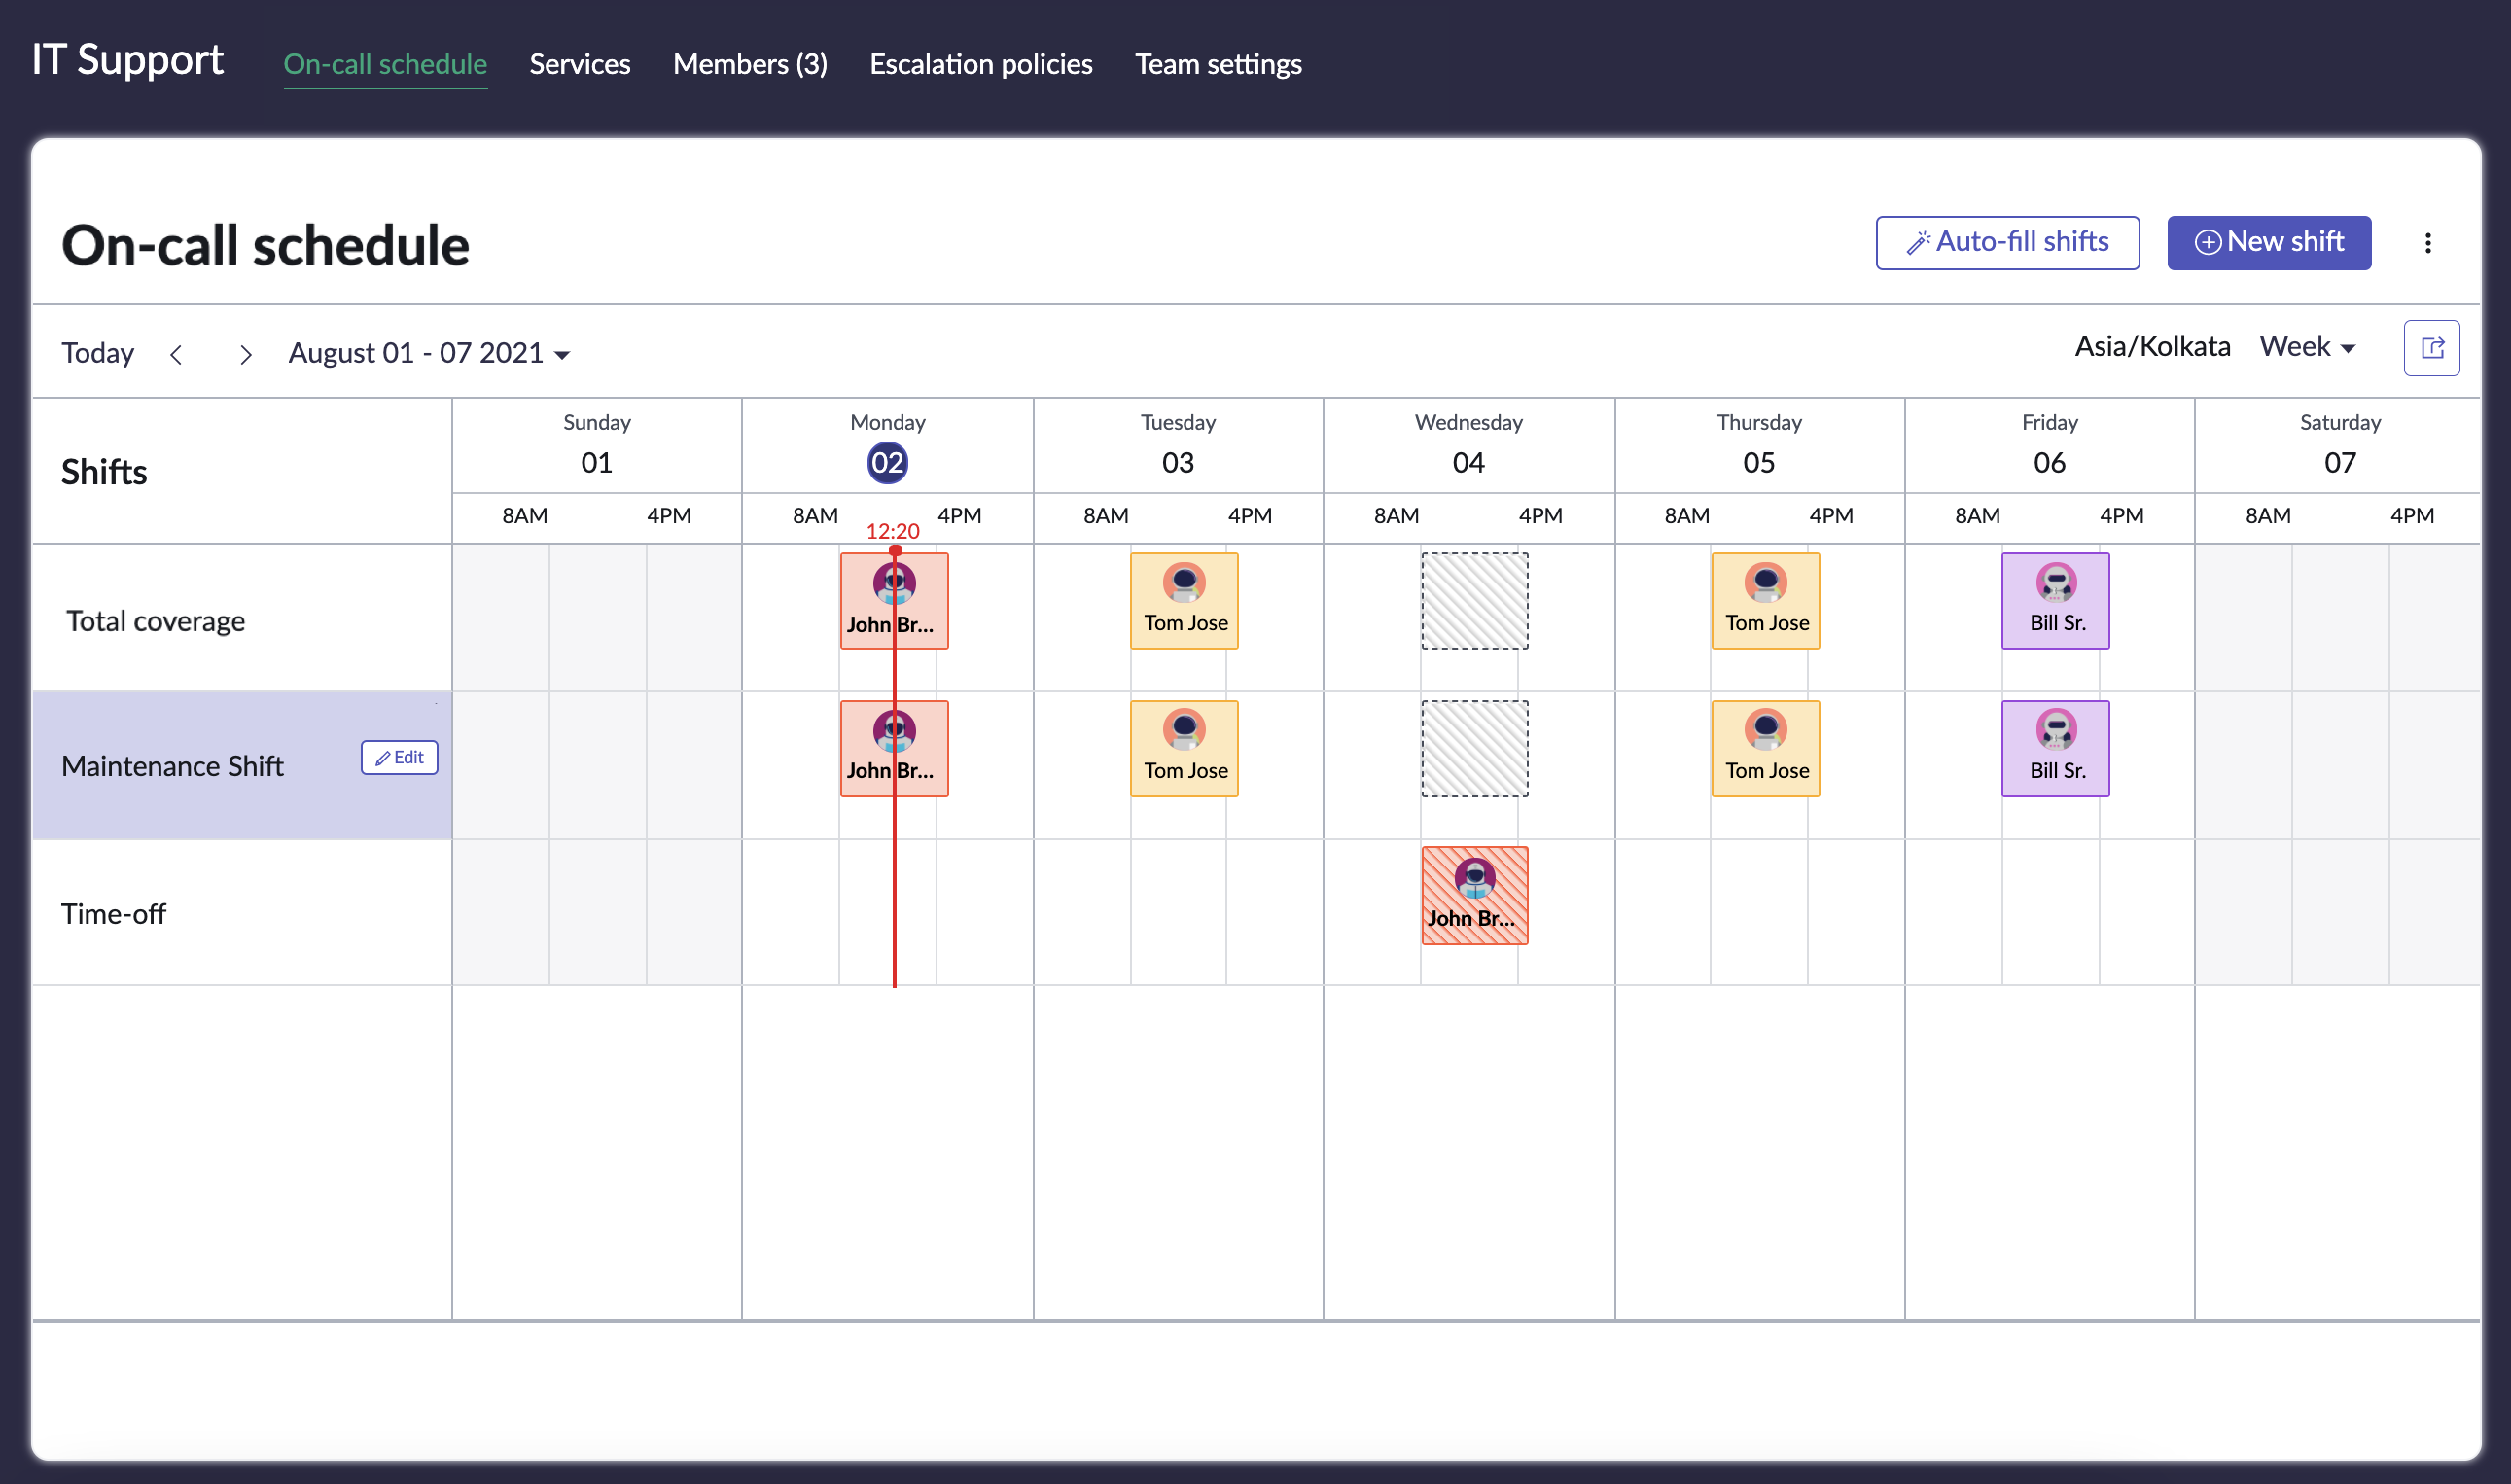 View on-call schedule page for the team.